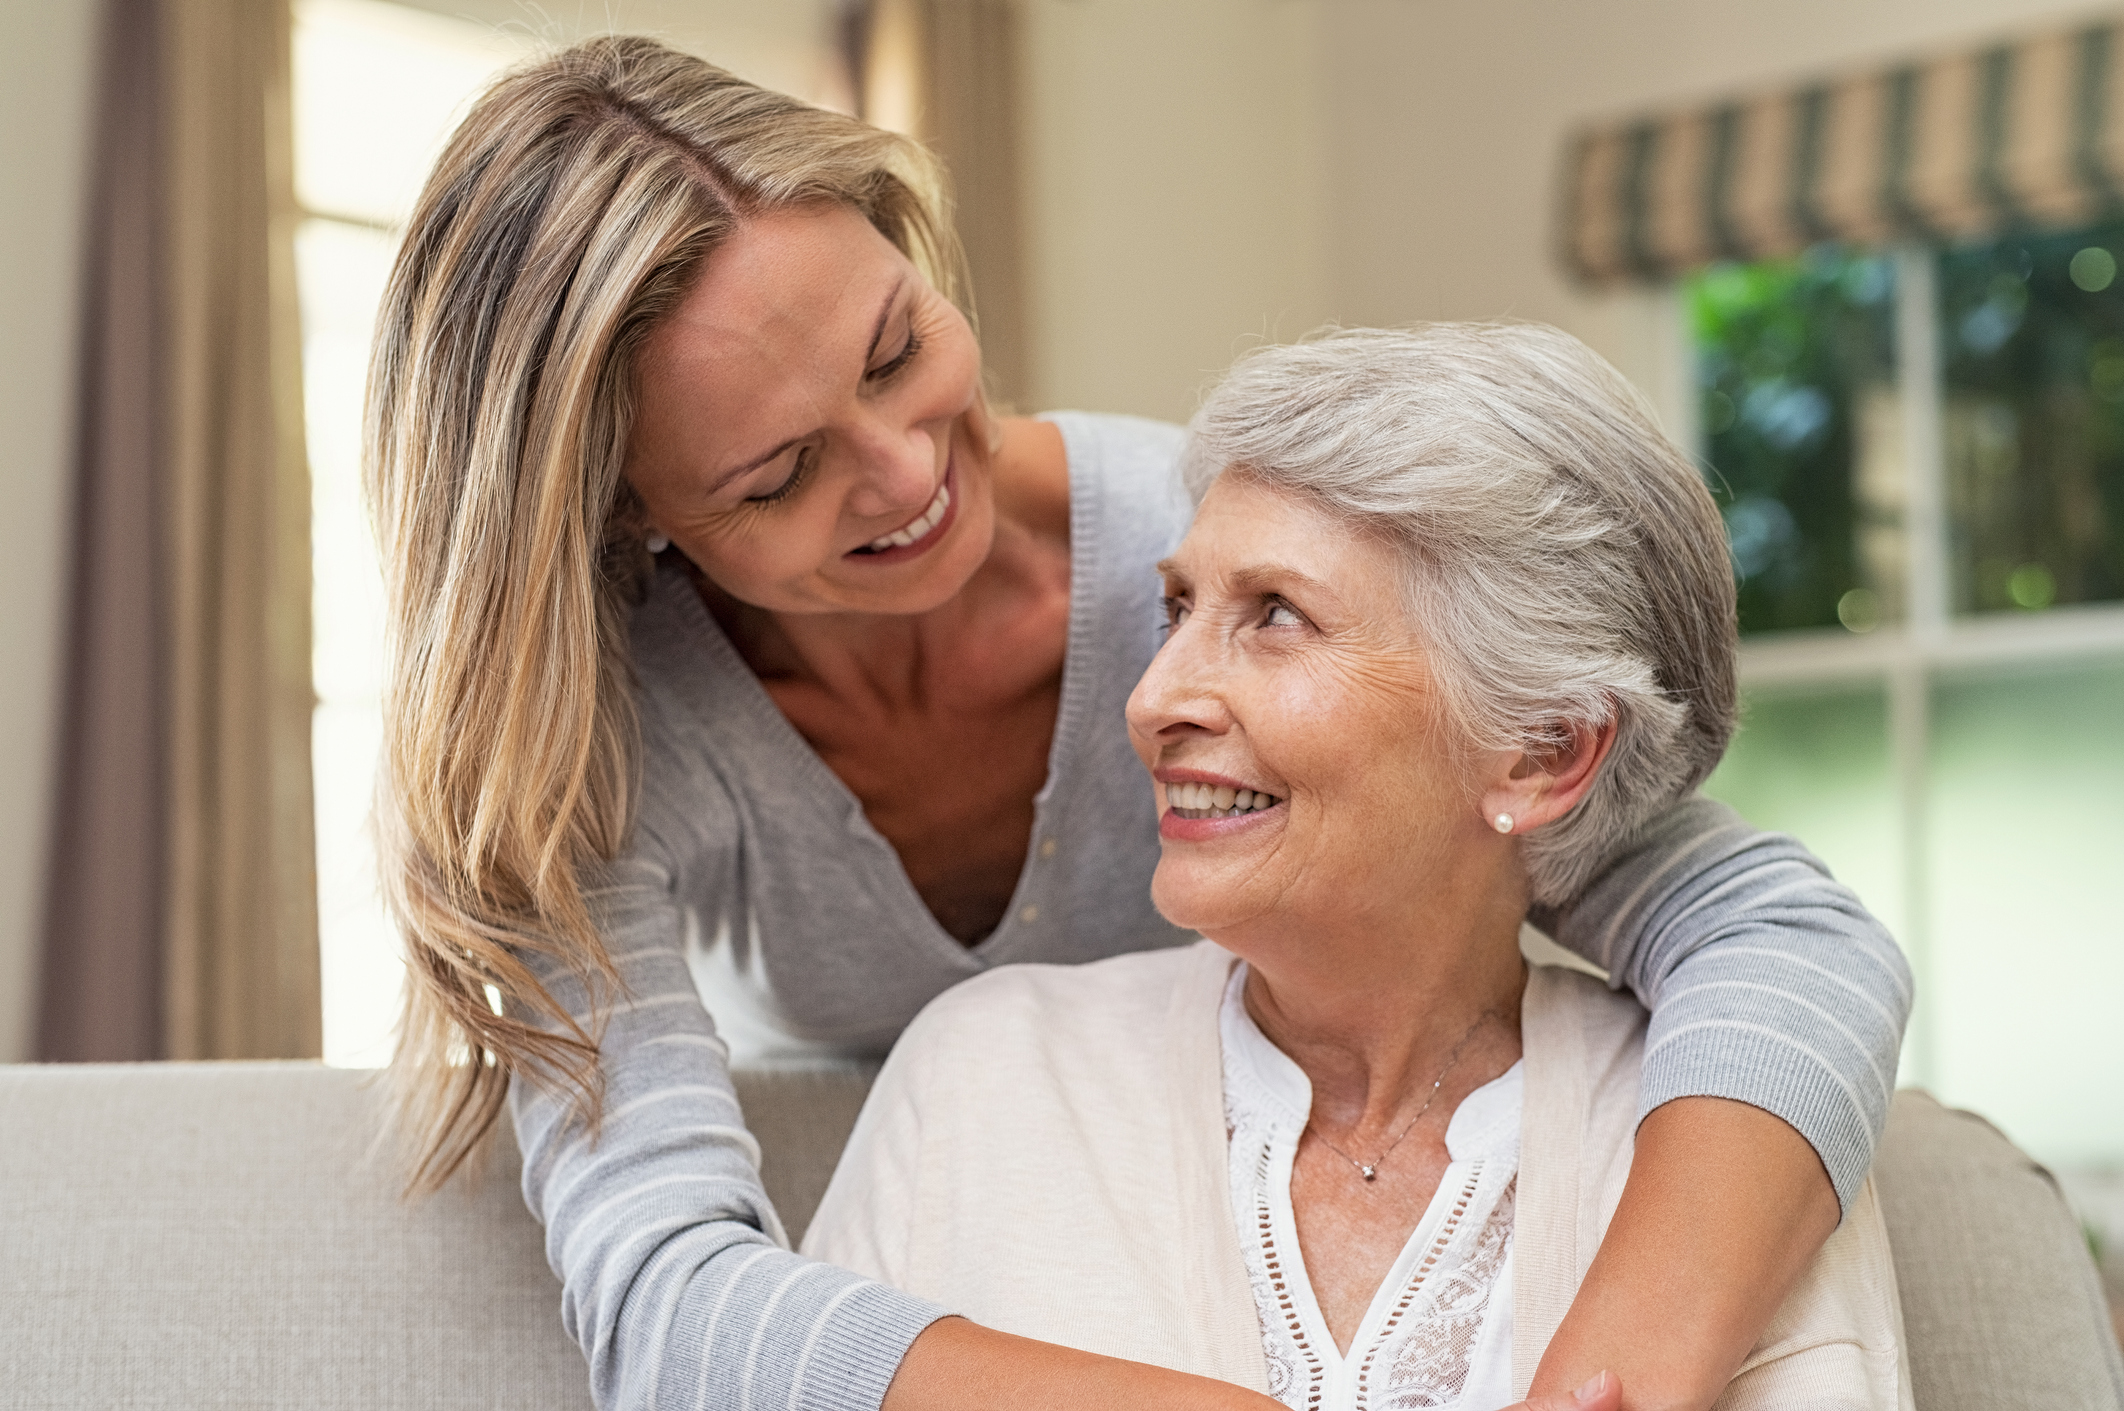 Here are some tips for caring for aging parents: